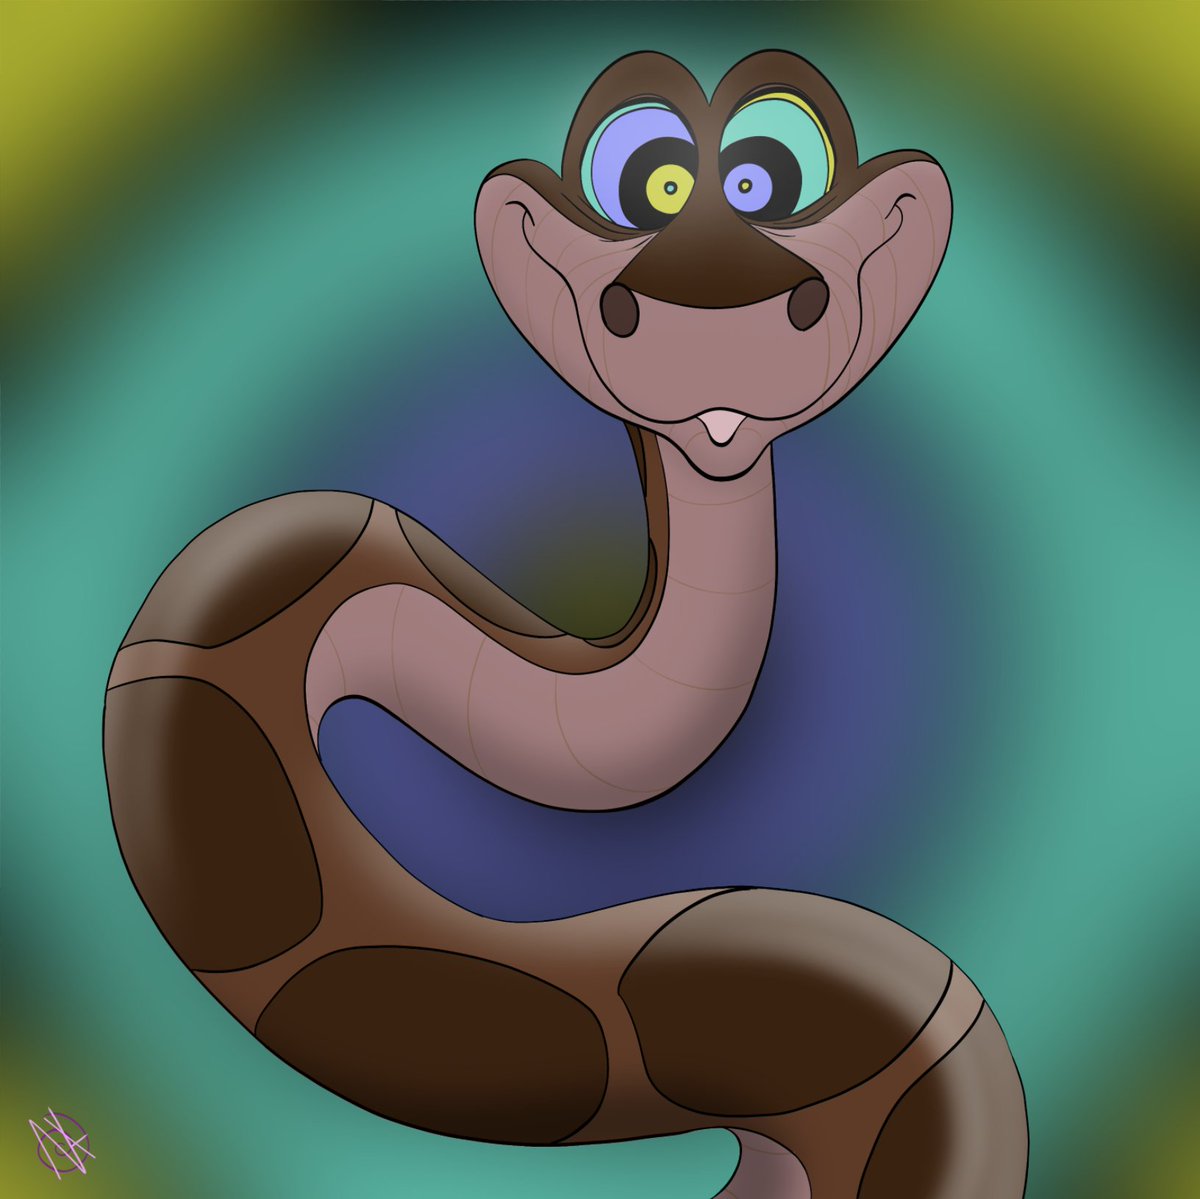 Hope everyone’s having an awesome Wednesday! Ive done a bit of Kaa sketching lately but not a lot of finished stuff, tho decided to put at least a lil more effort into thisss one. :3